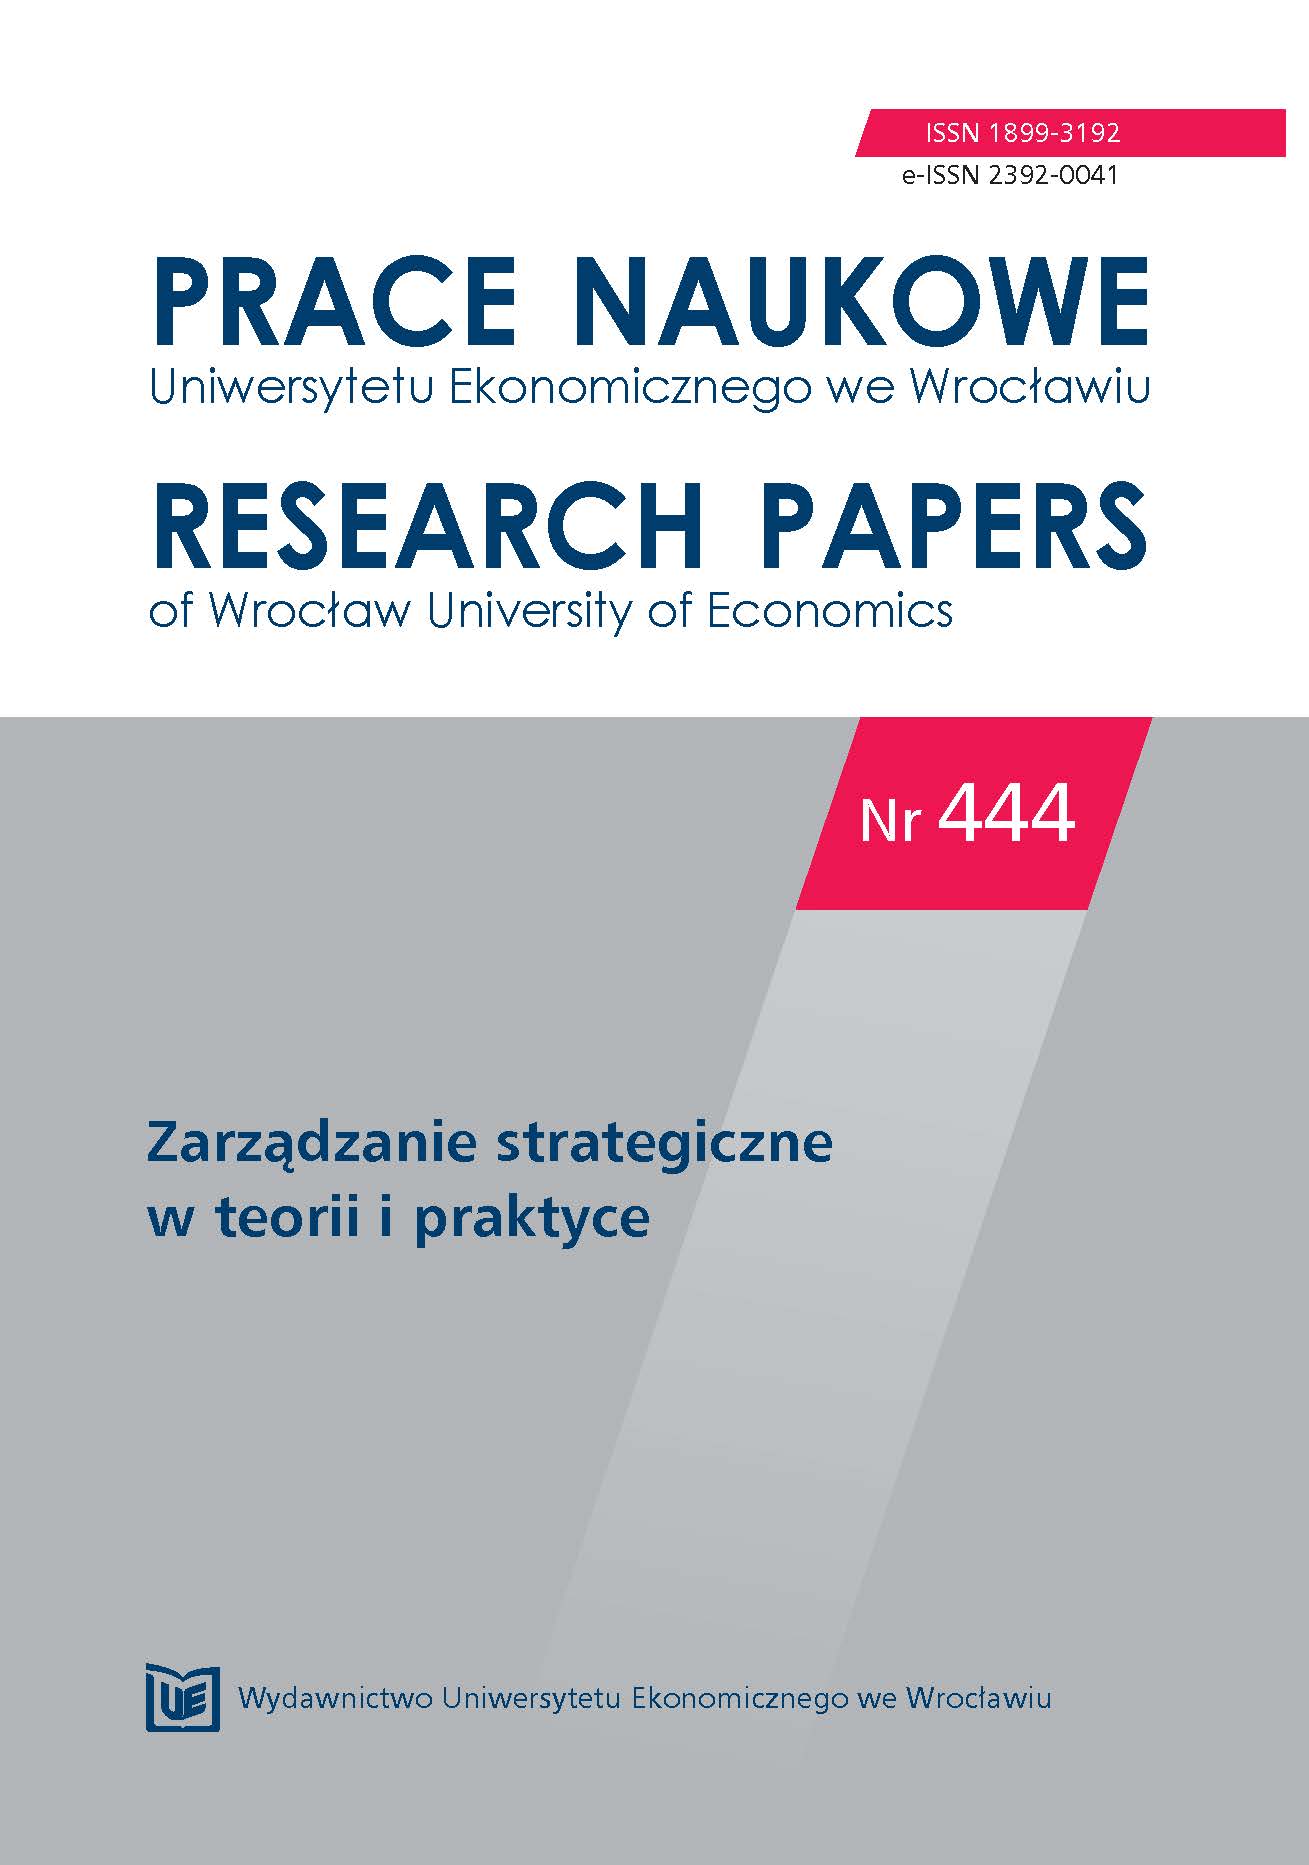 Personal ties as a component of business relationships according to Polish enterprises’ representatives Cover Image